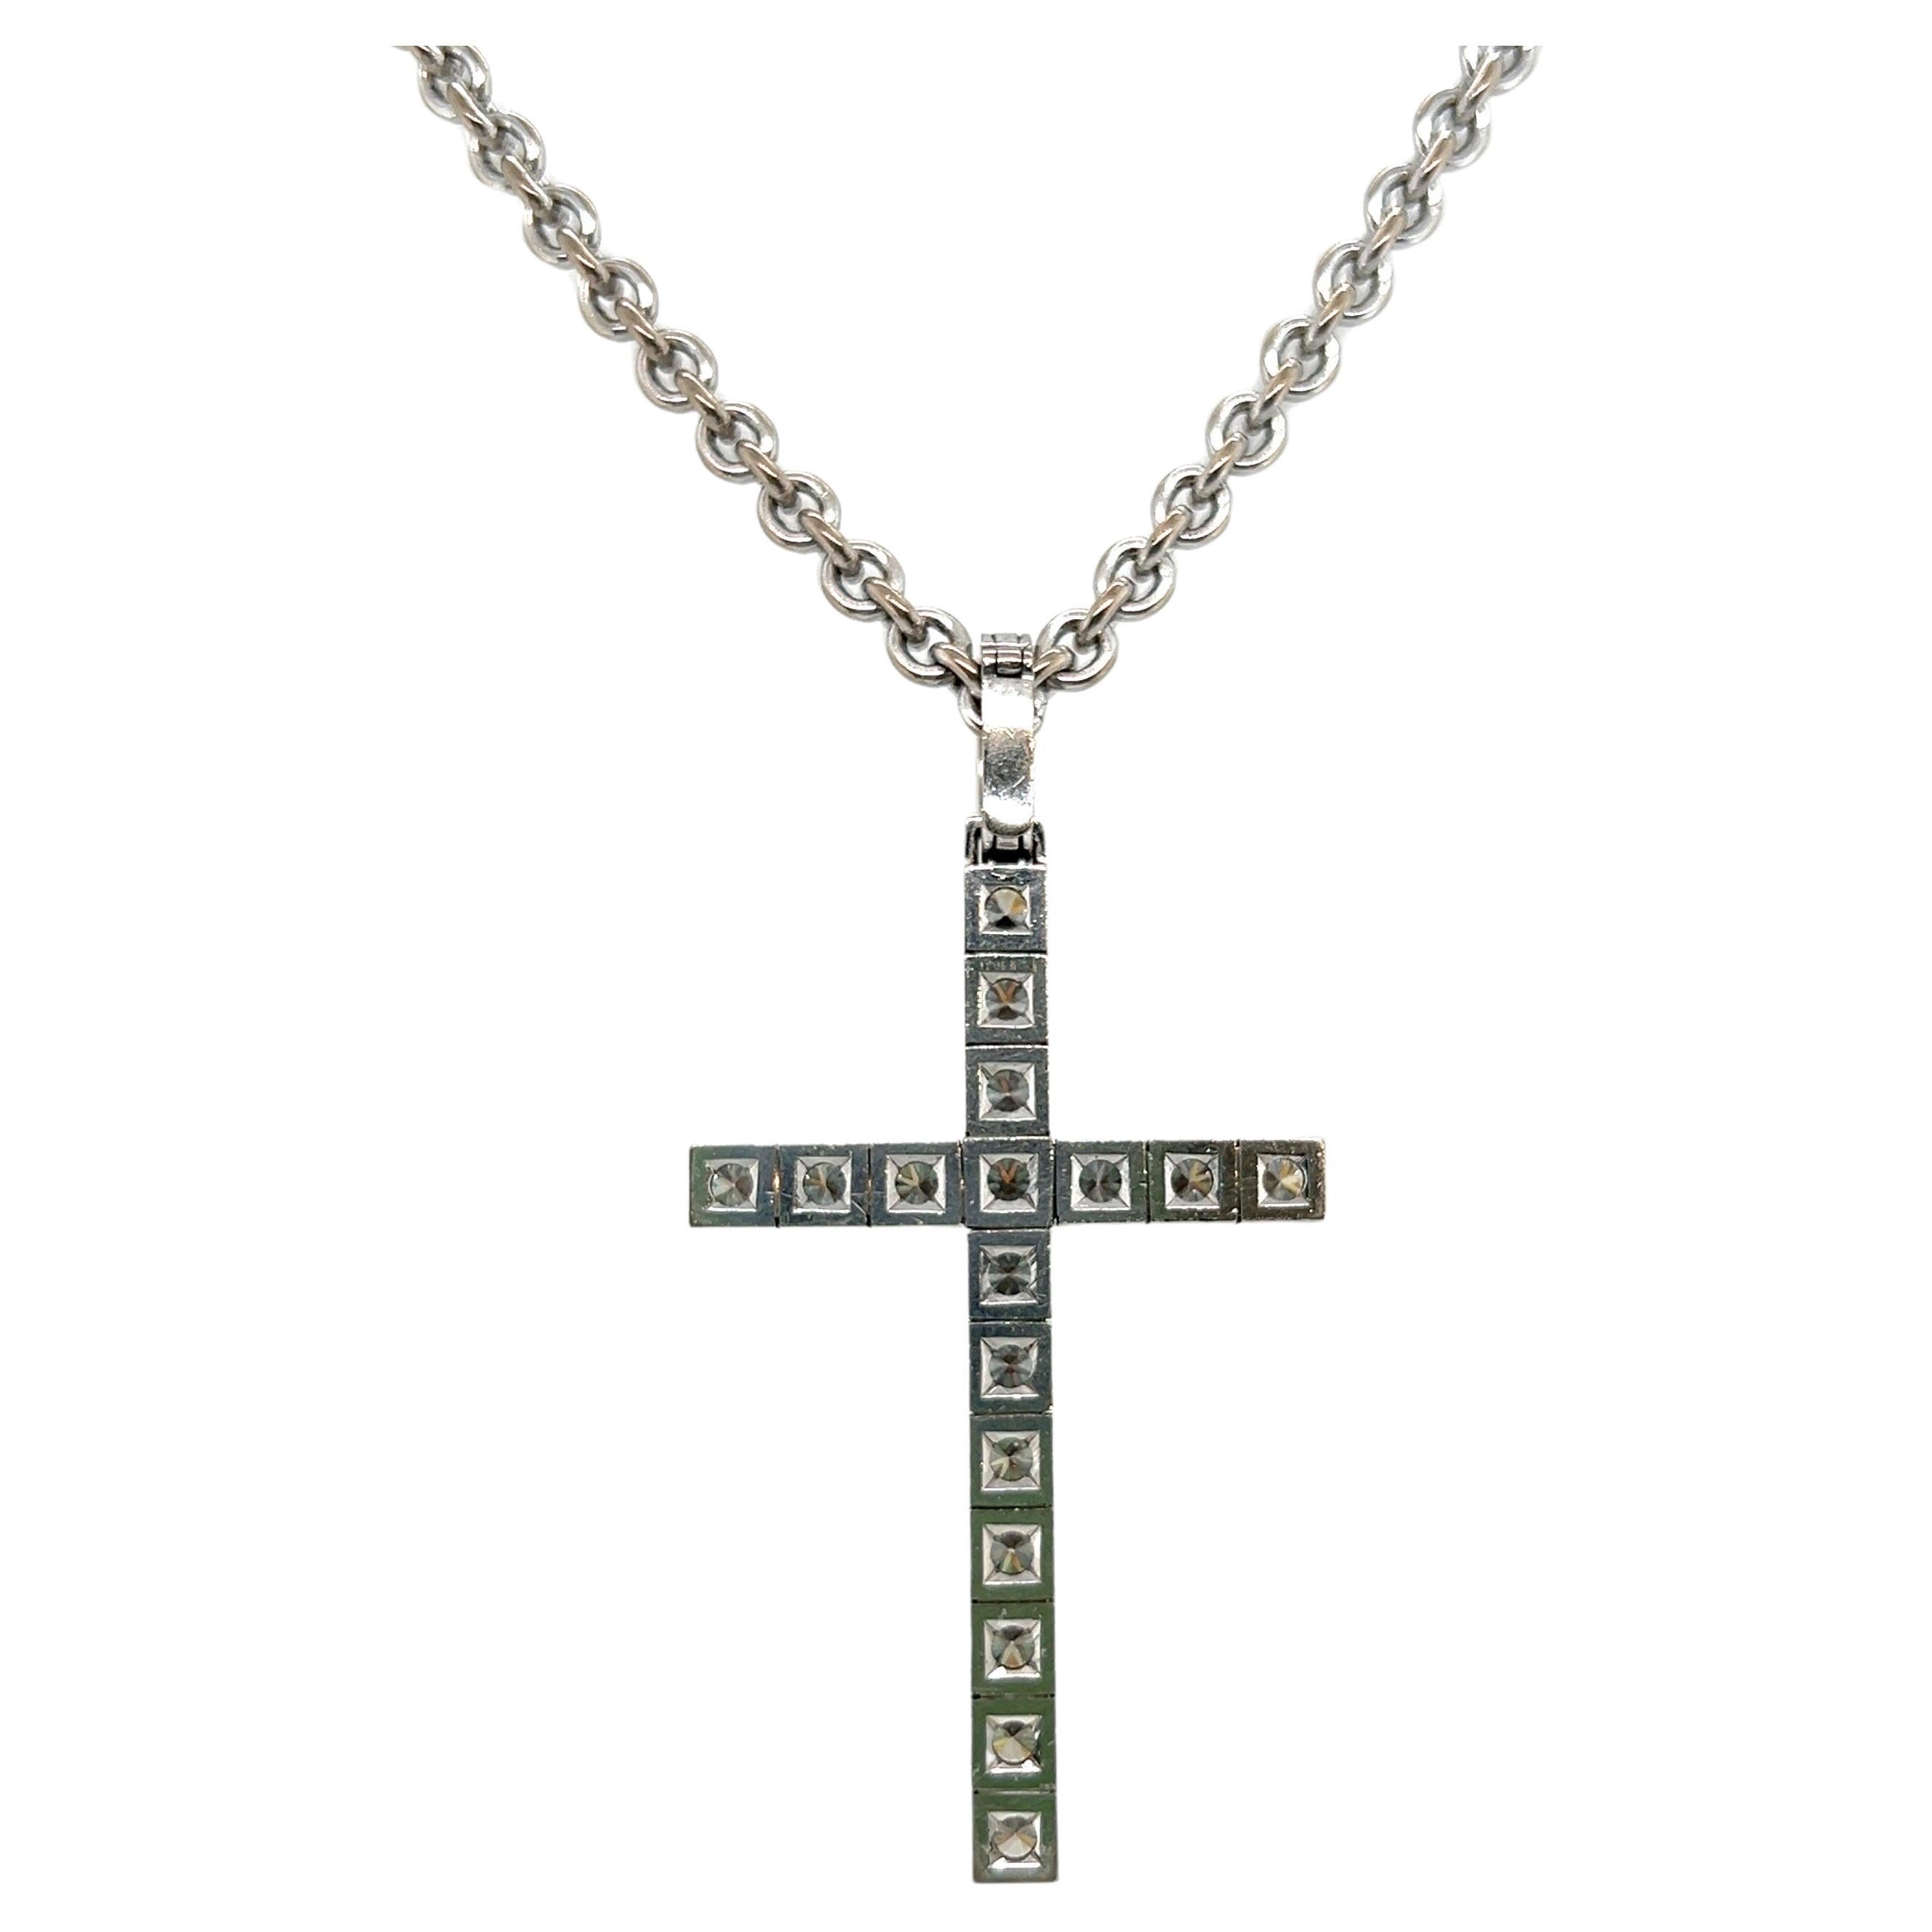 Extraordinary 18 karat white gold and diamond cross pendant with chain by renowned Swiss tradition jewelry house Meister.

Pendant designed as a cross and set with 17 brilliant-cut diamonds totalling circa 2.70 carats. The hinged bail is